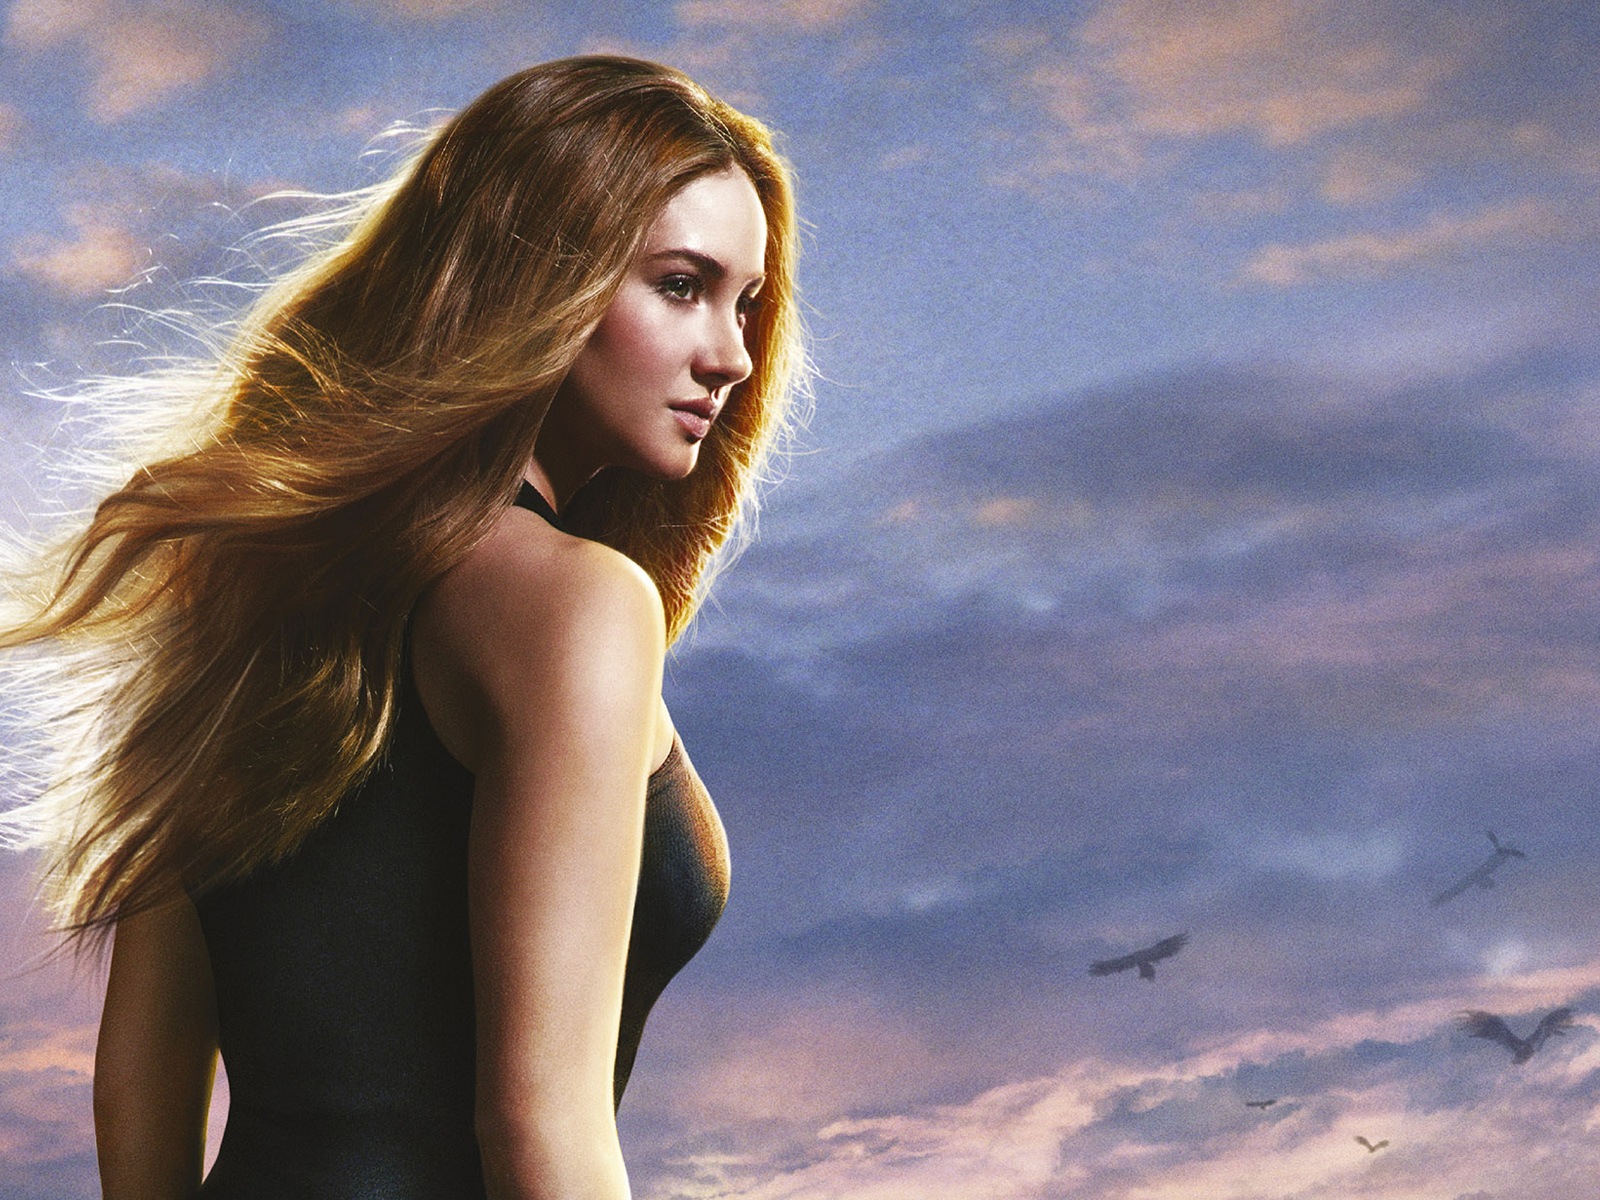 Divergent movie HD wallpapers #11 - 1600x1200